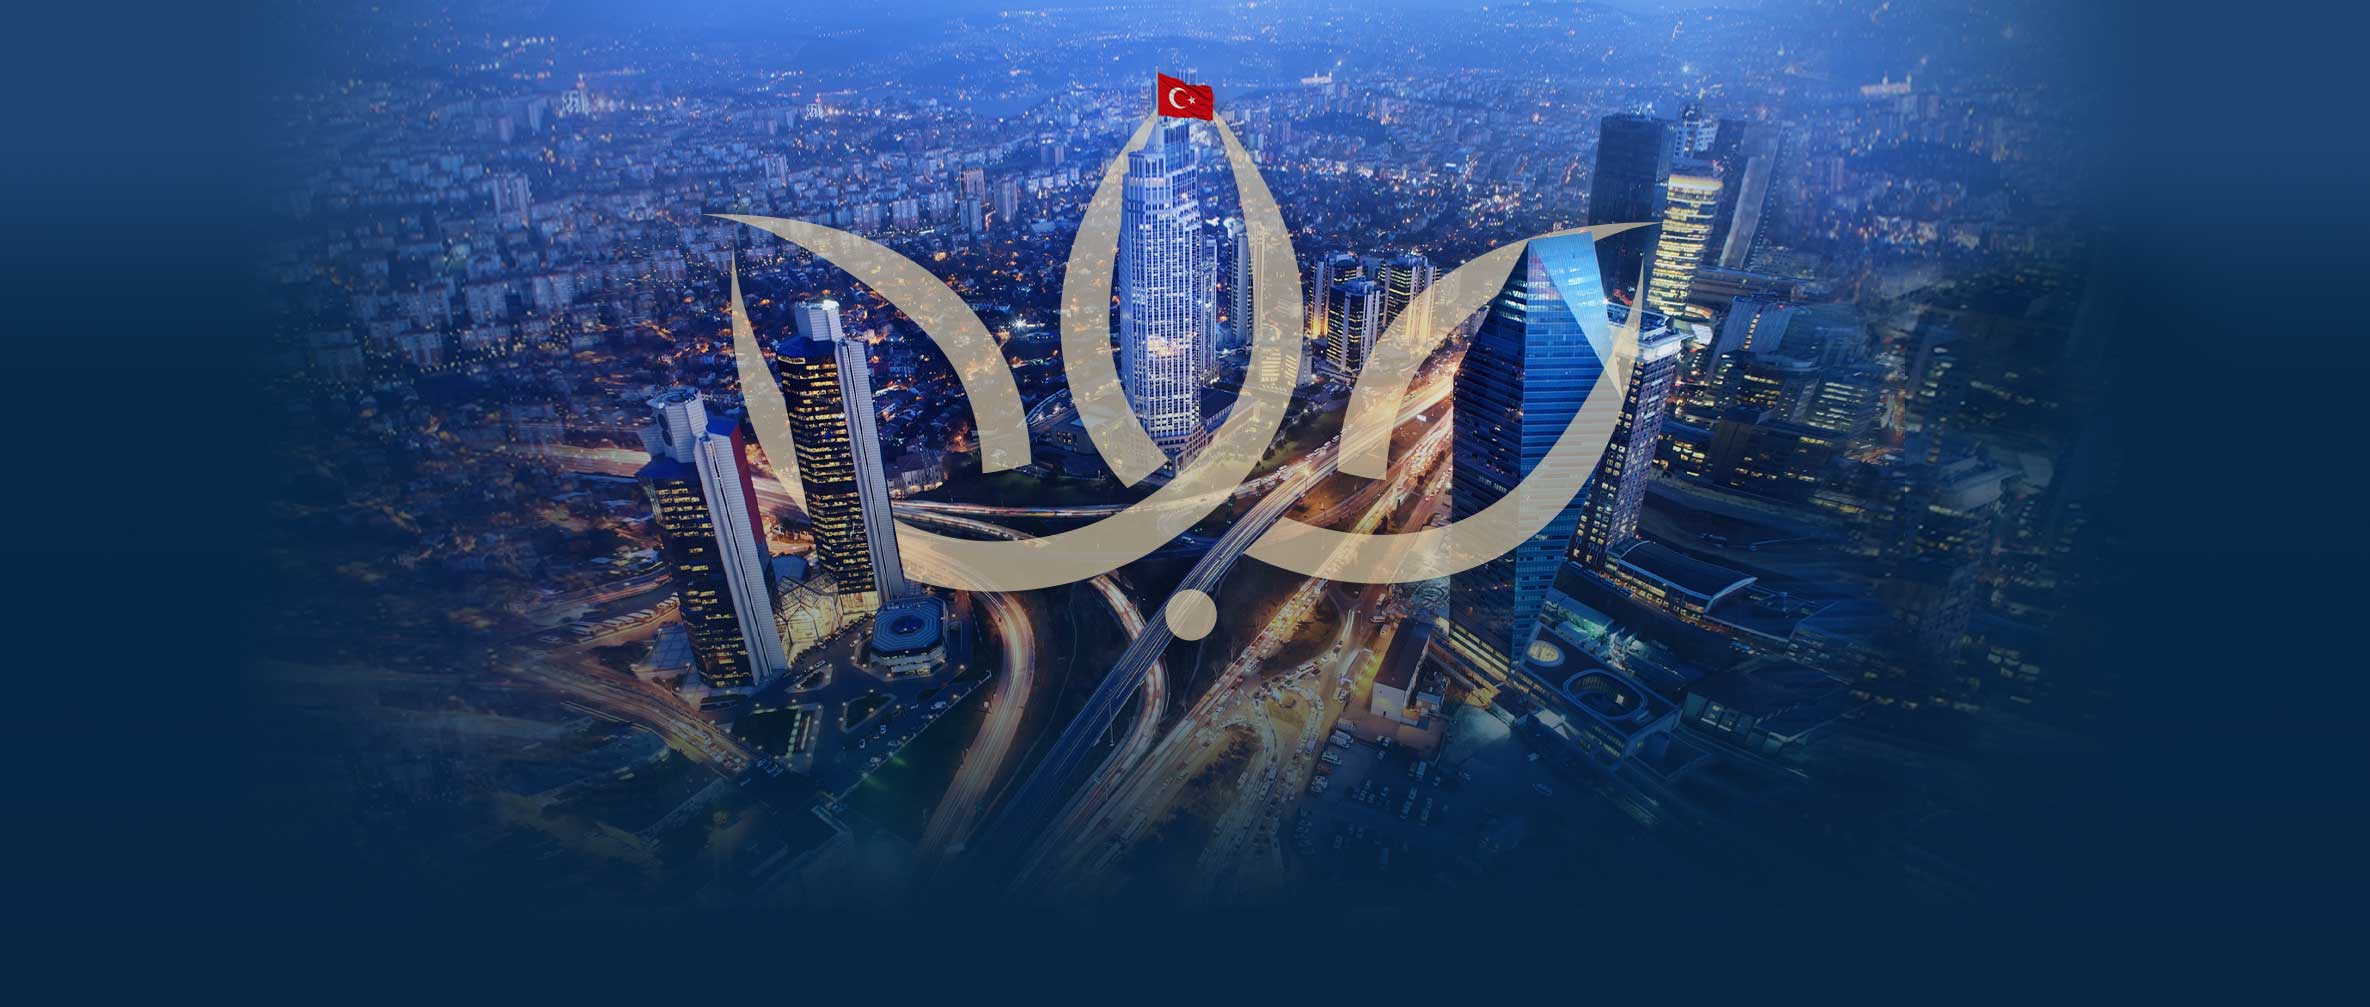 A PIONEERING INVESTMENT BANK IN TURKEY